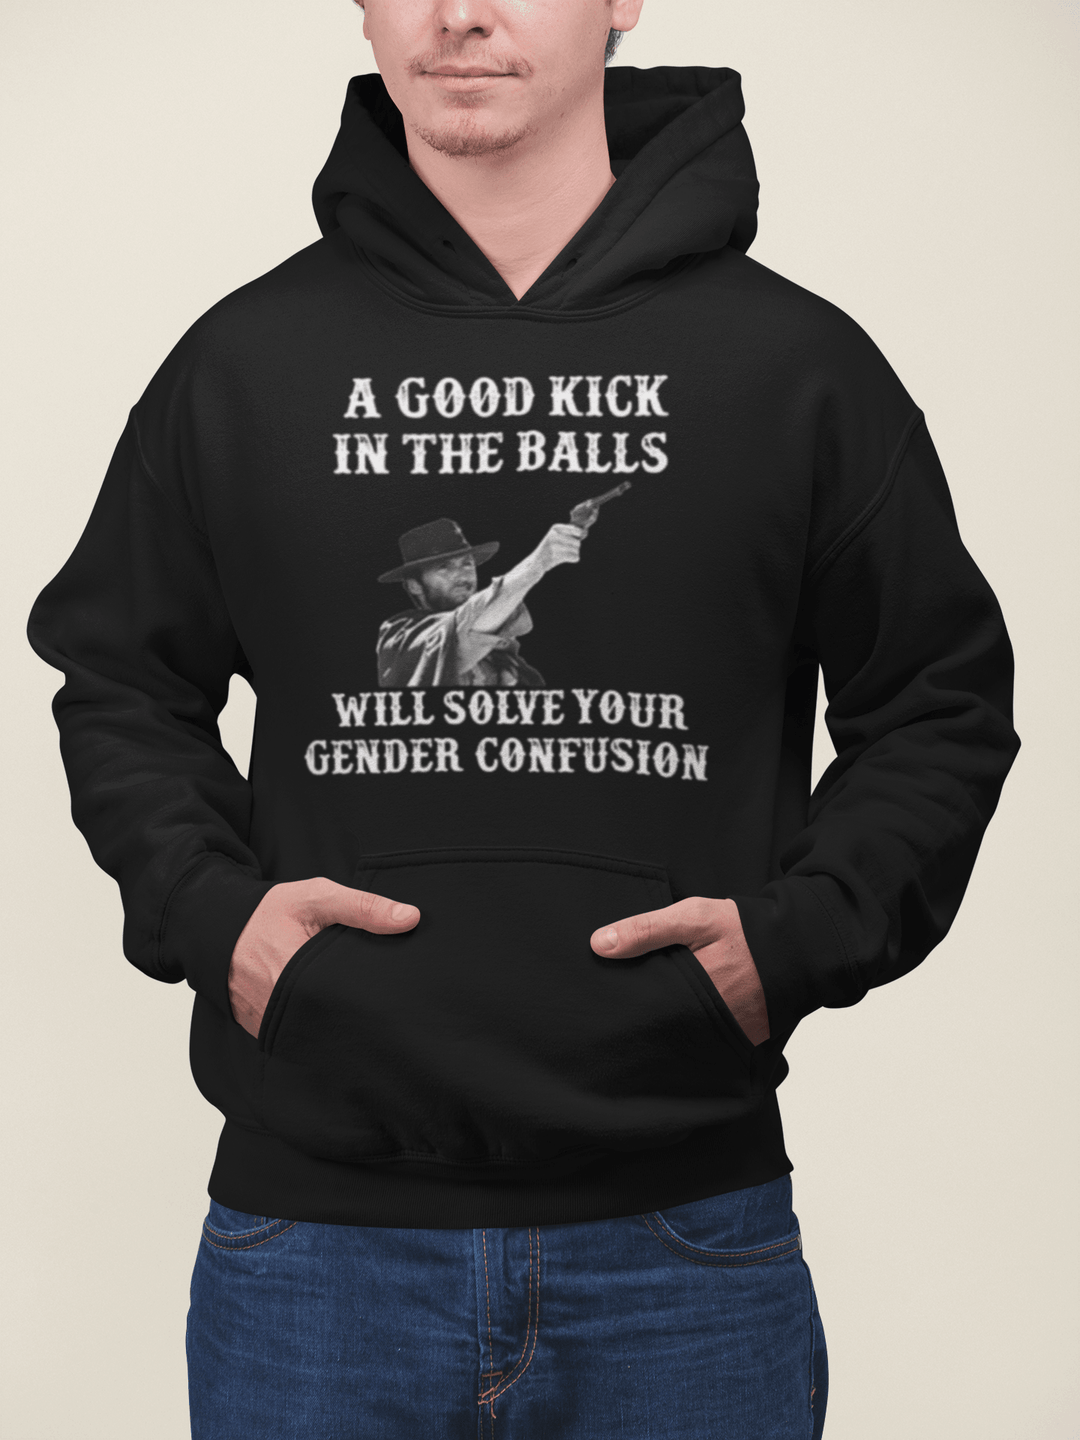 Gender Identity Hoodie A Kick In The Balls Will Solve Gender Confusion Blended Cotton Pullover - TopKoalaTee